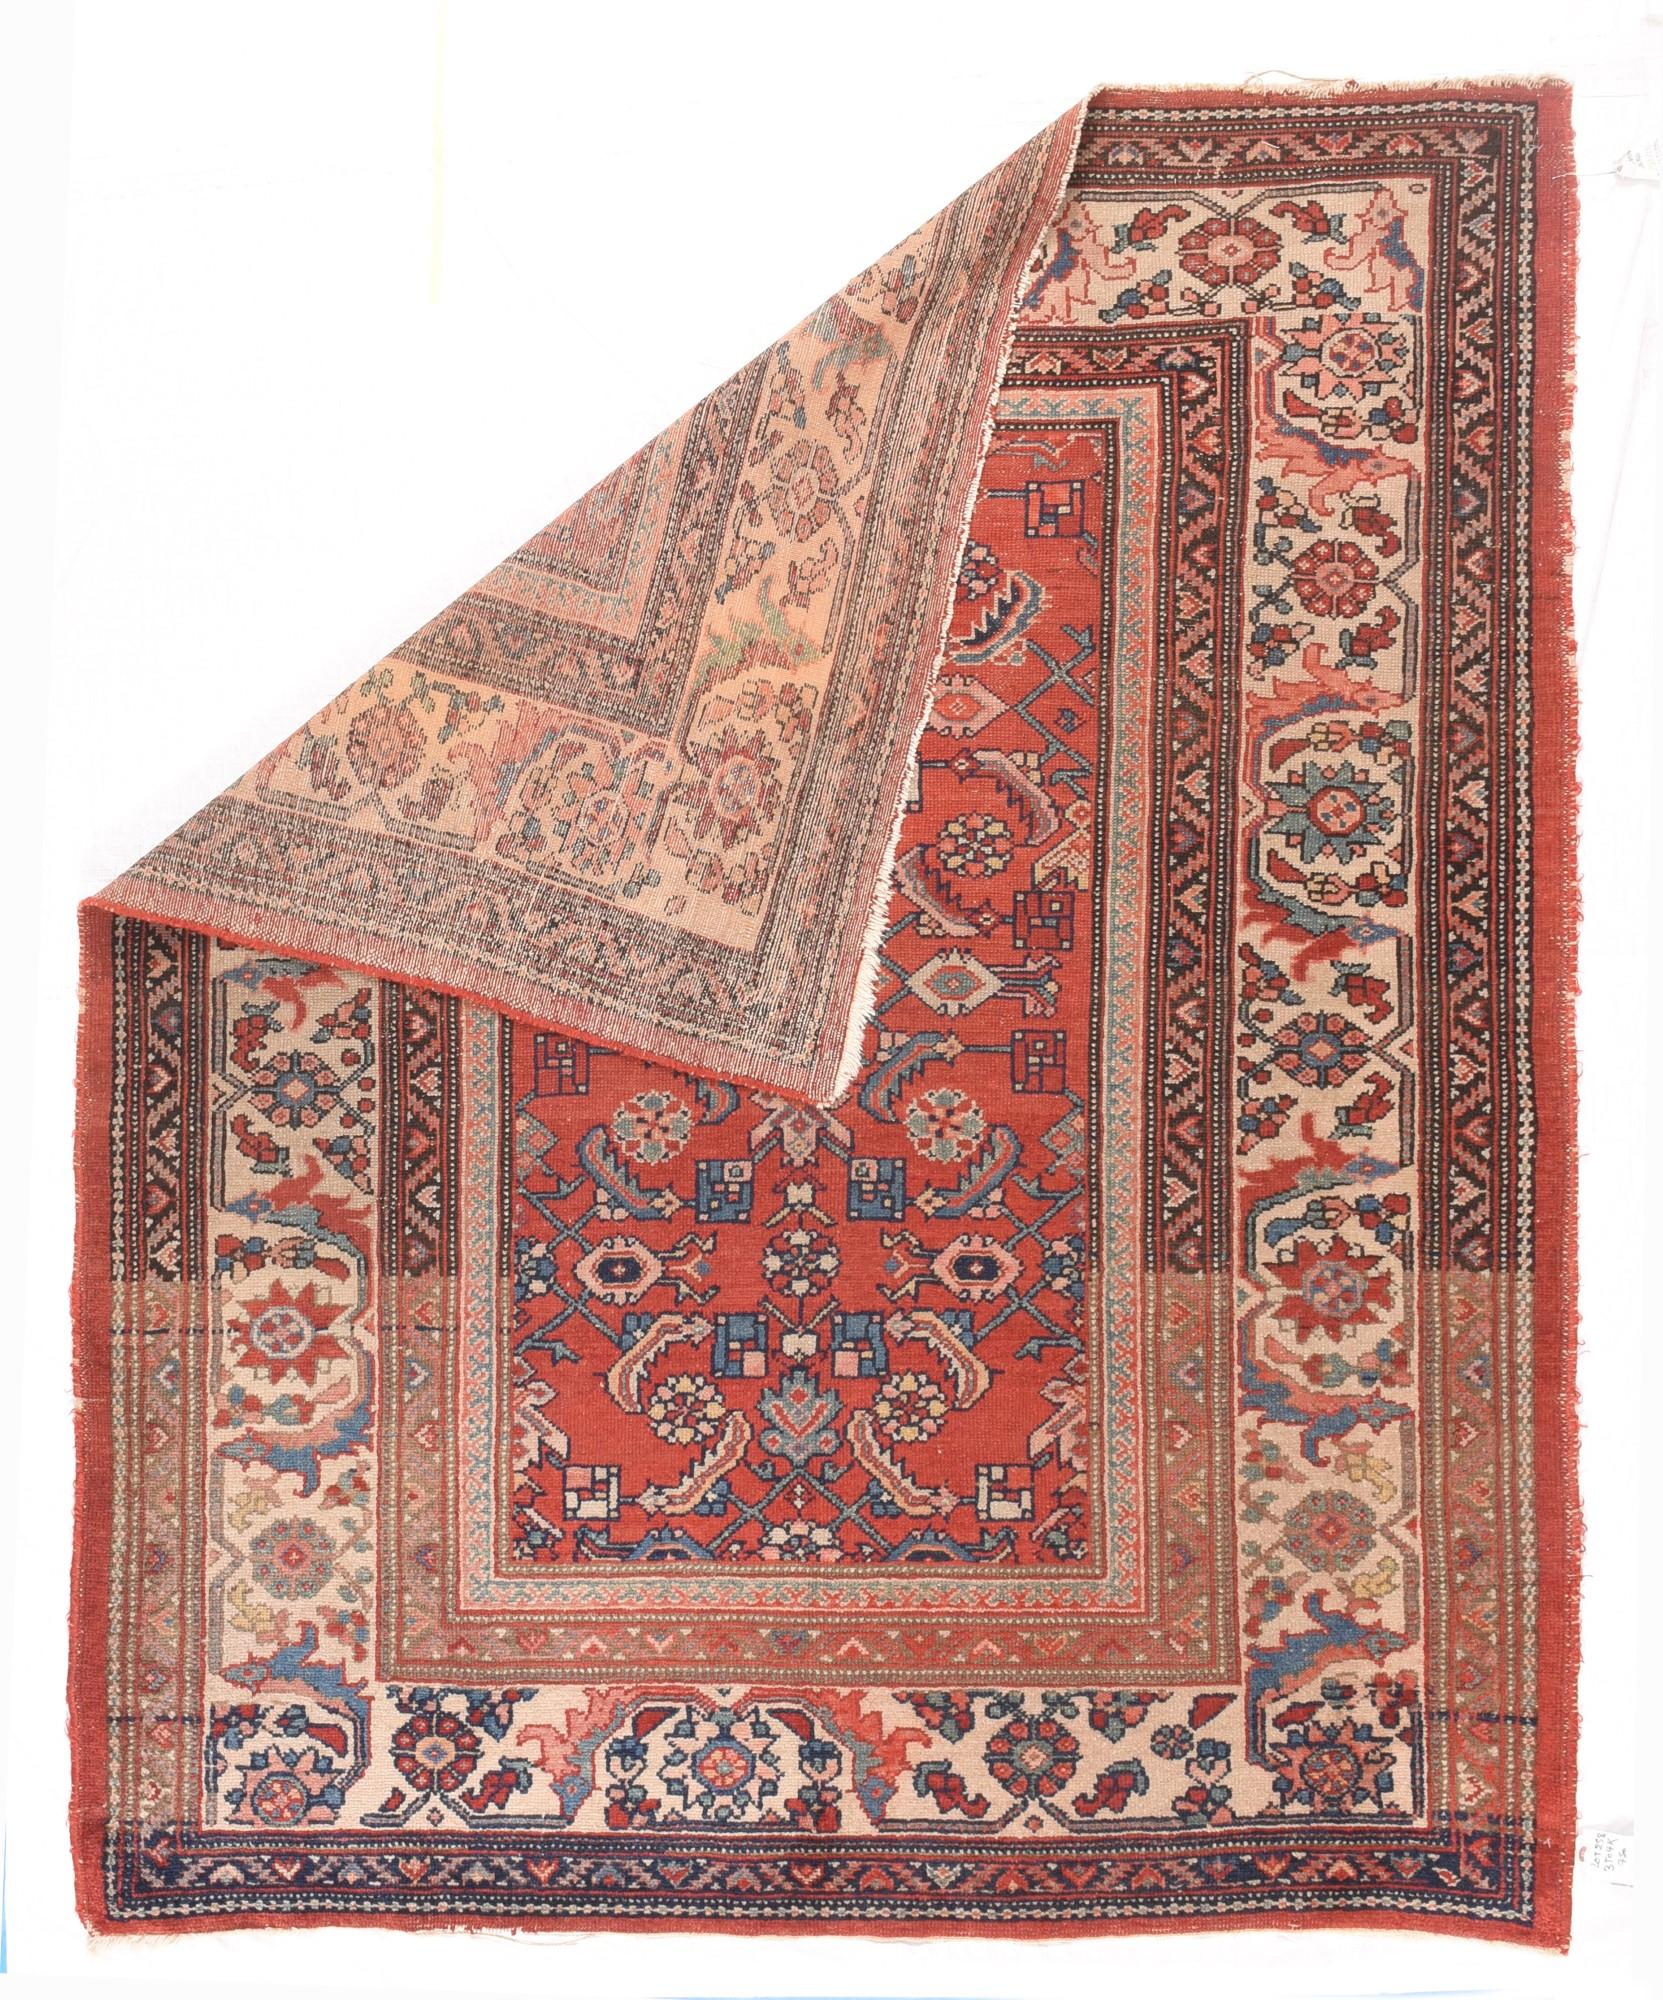 Antique Malayer rug 5'3'' x 6'3''. This squarish antique scatter comes from a village in western Persia in the Greater Hamadan Weaving Area. The rust red and old ivory palette is visibly abrashed in the minor borders. The perennially popular Herati